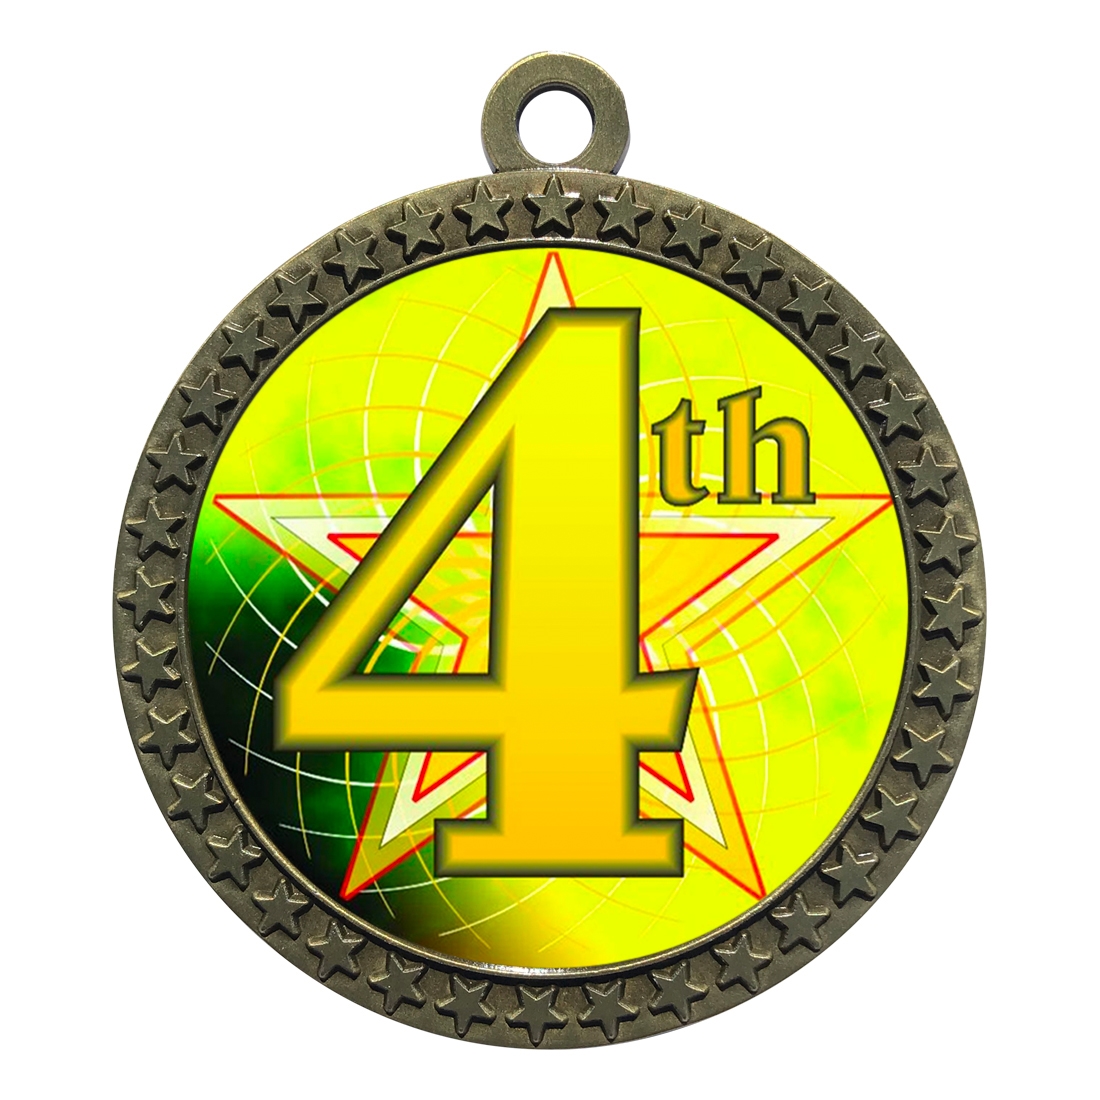 2-1/2" 4th Place Medal